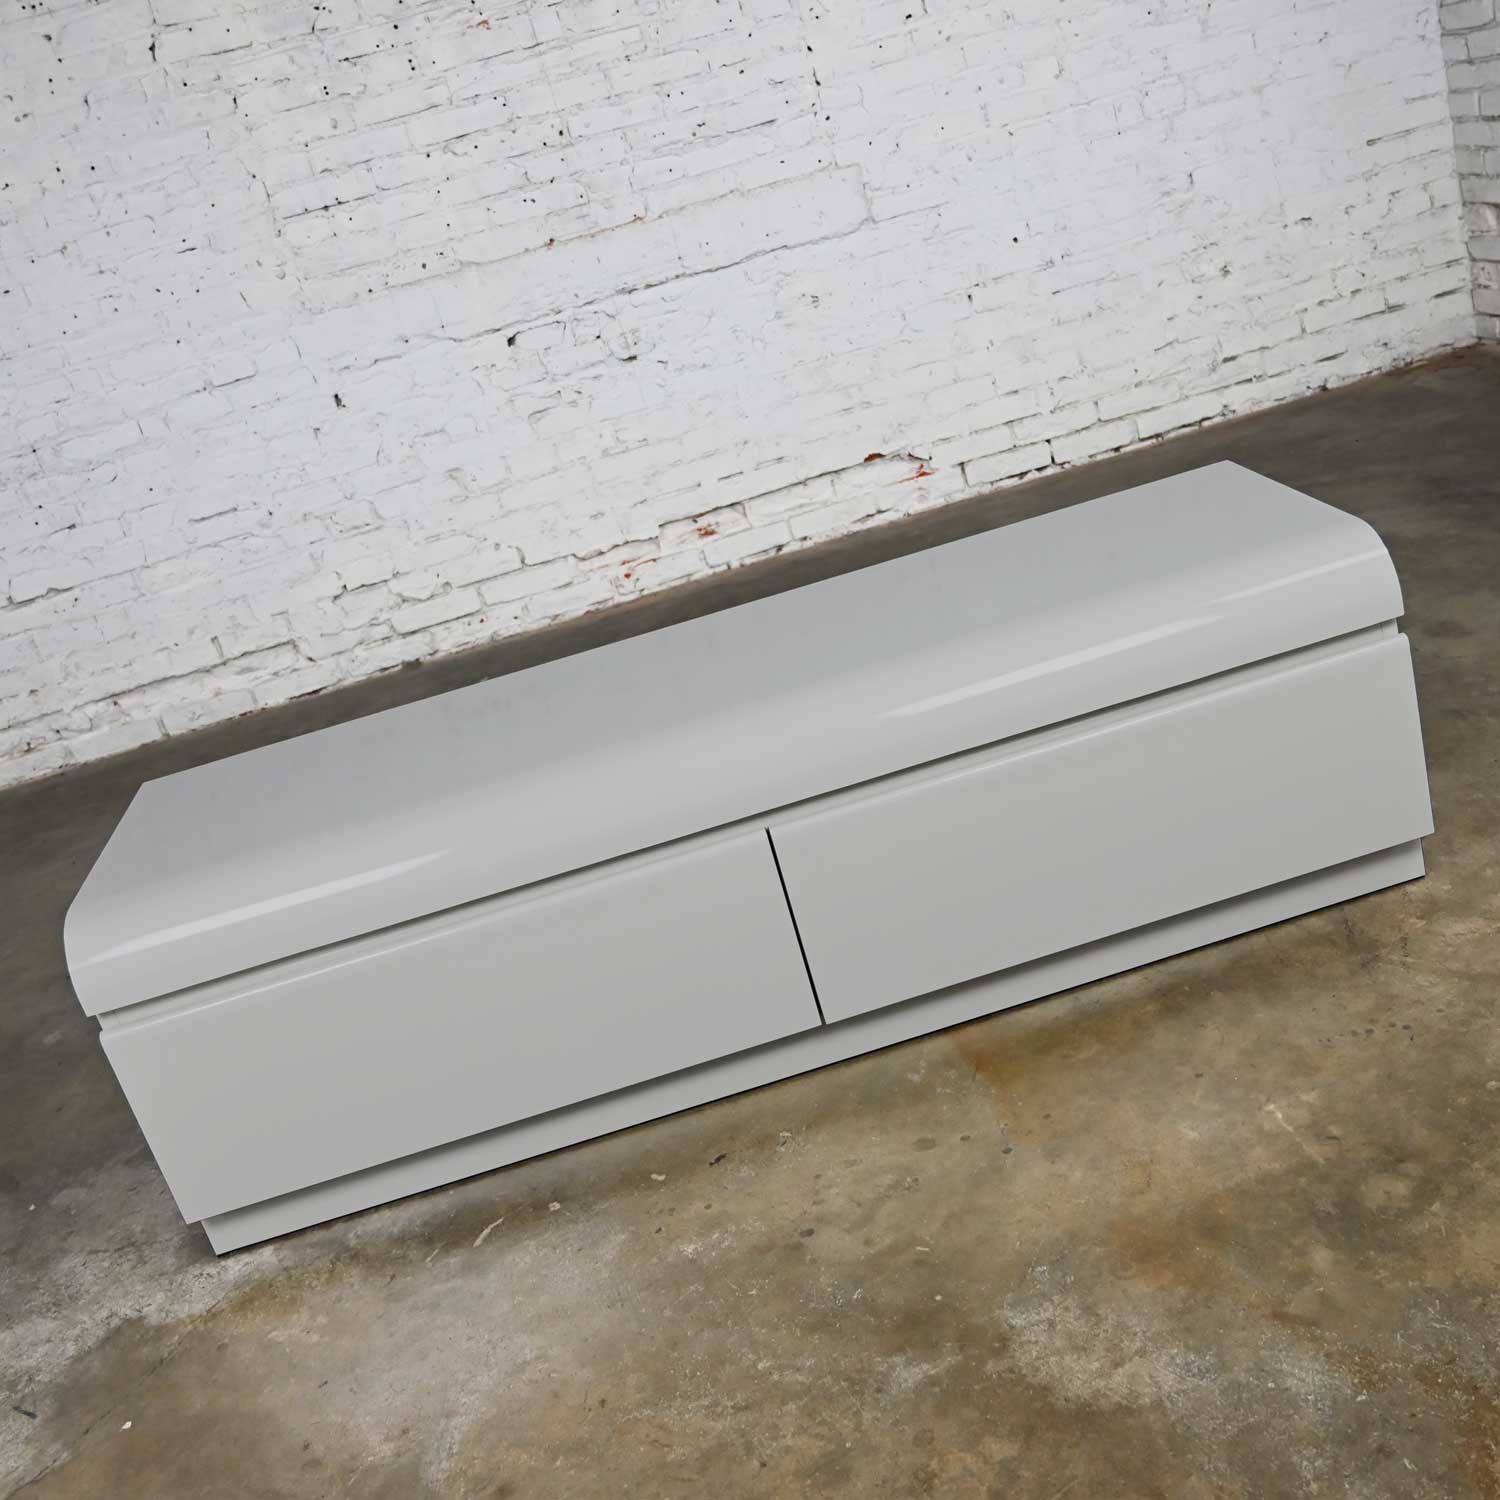 Modern Custom Built Light Gray Laminate Low 2 Drawer Dresser or Bench Seat by Center Displays of KCMO